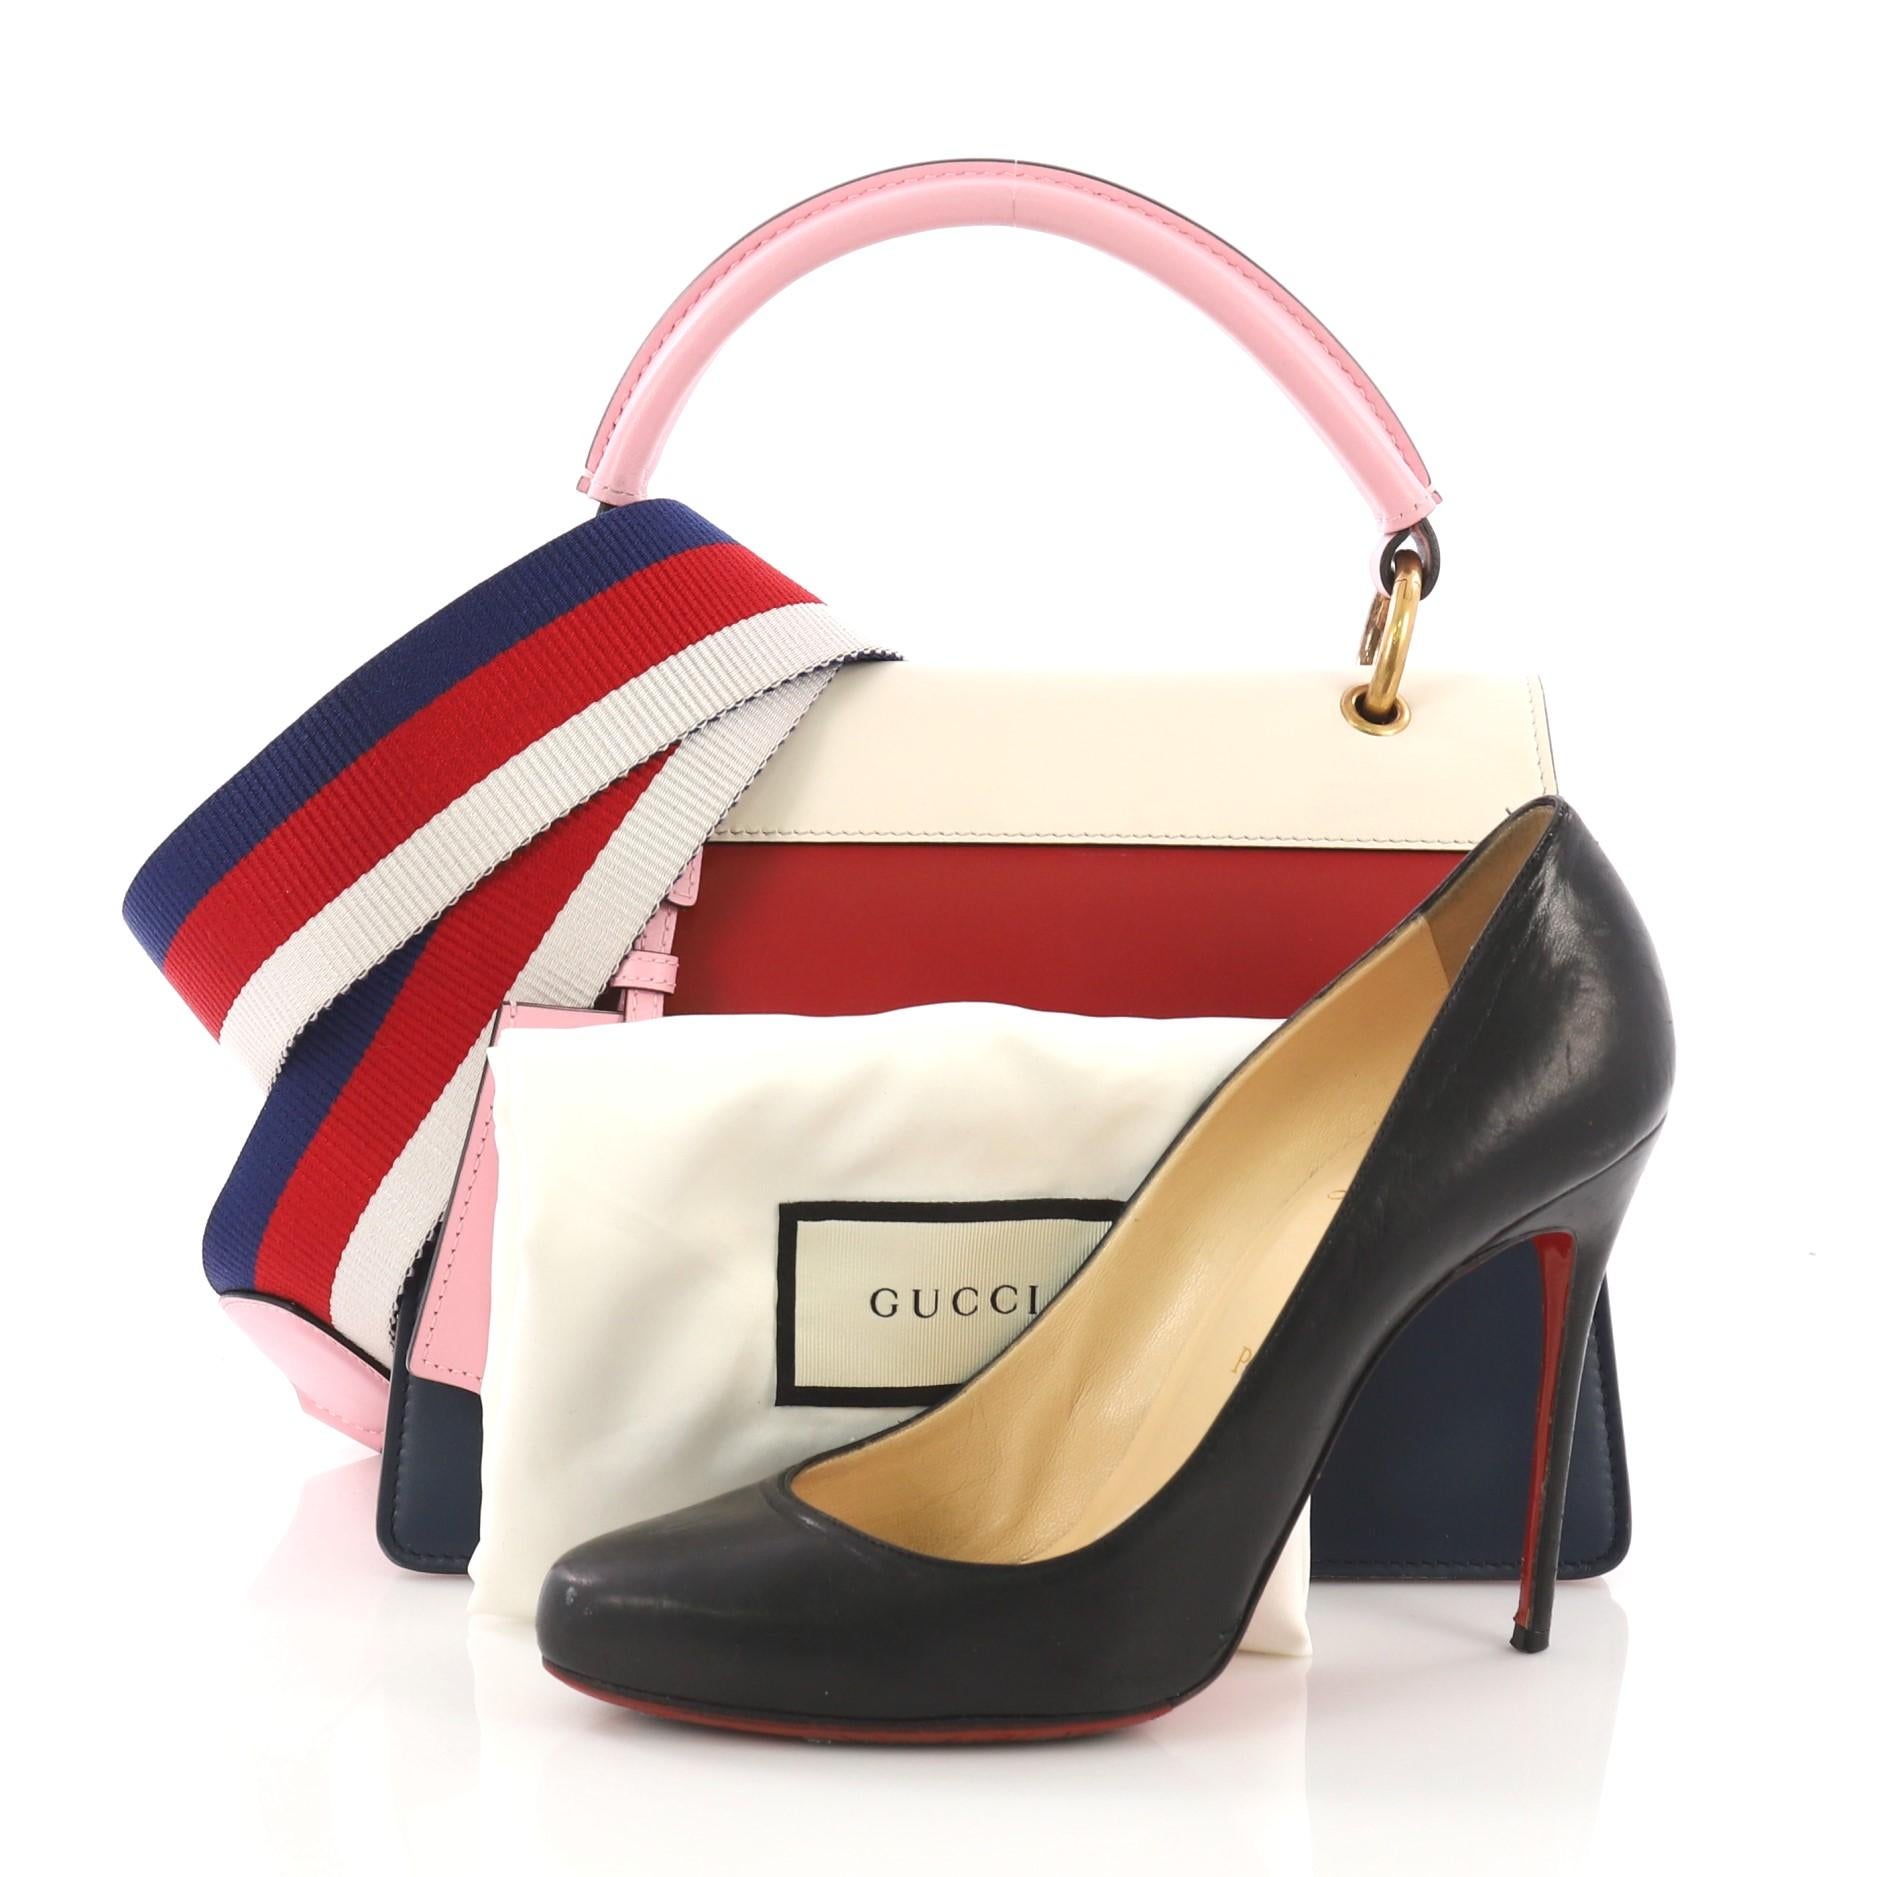 This Gucci Queen Margaret Top Handle Bag Colorblock Leather Small, crafted from red, blue and white leather, features a leather top handle, bejeweled bee on its flap, and aged gold-tone hardware. It opens to a beige microfiber interior divided into